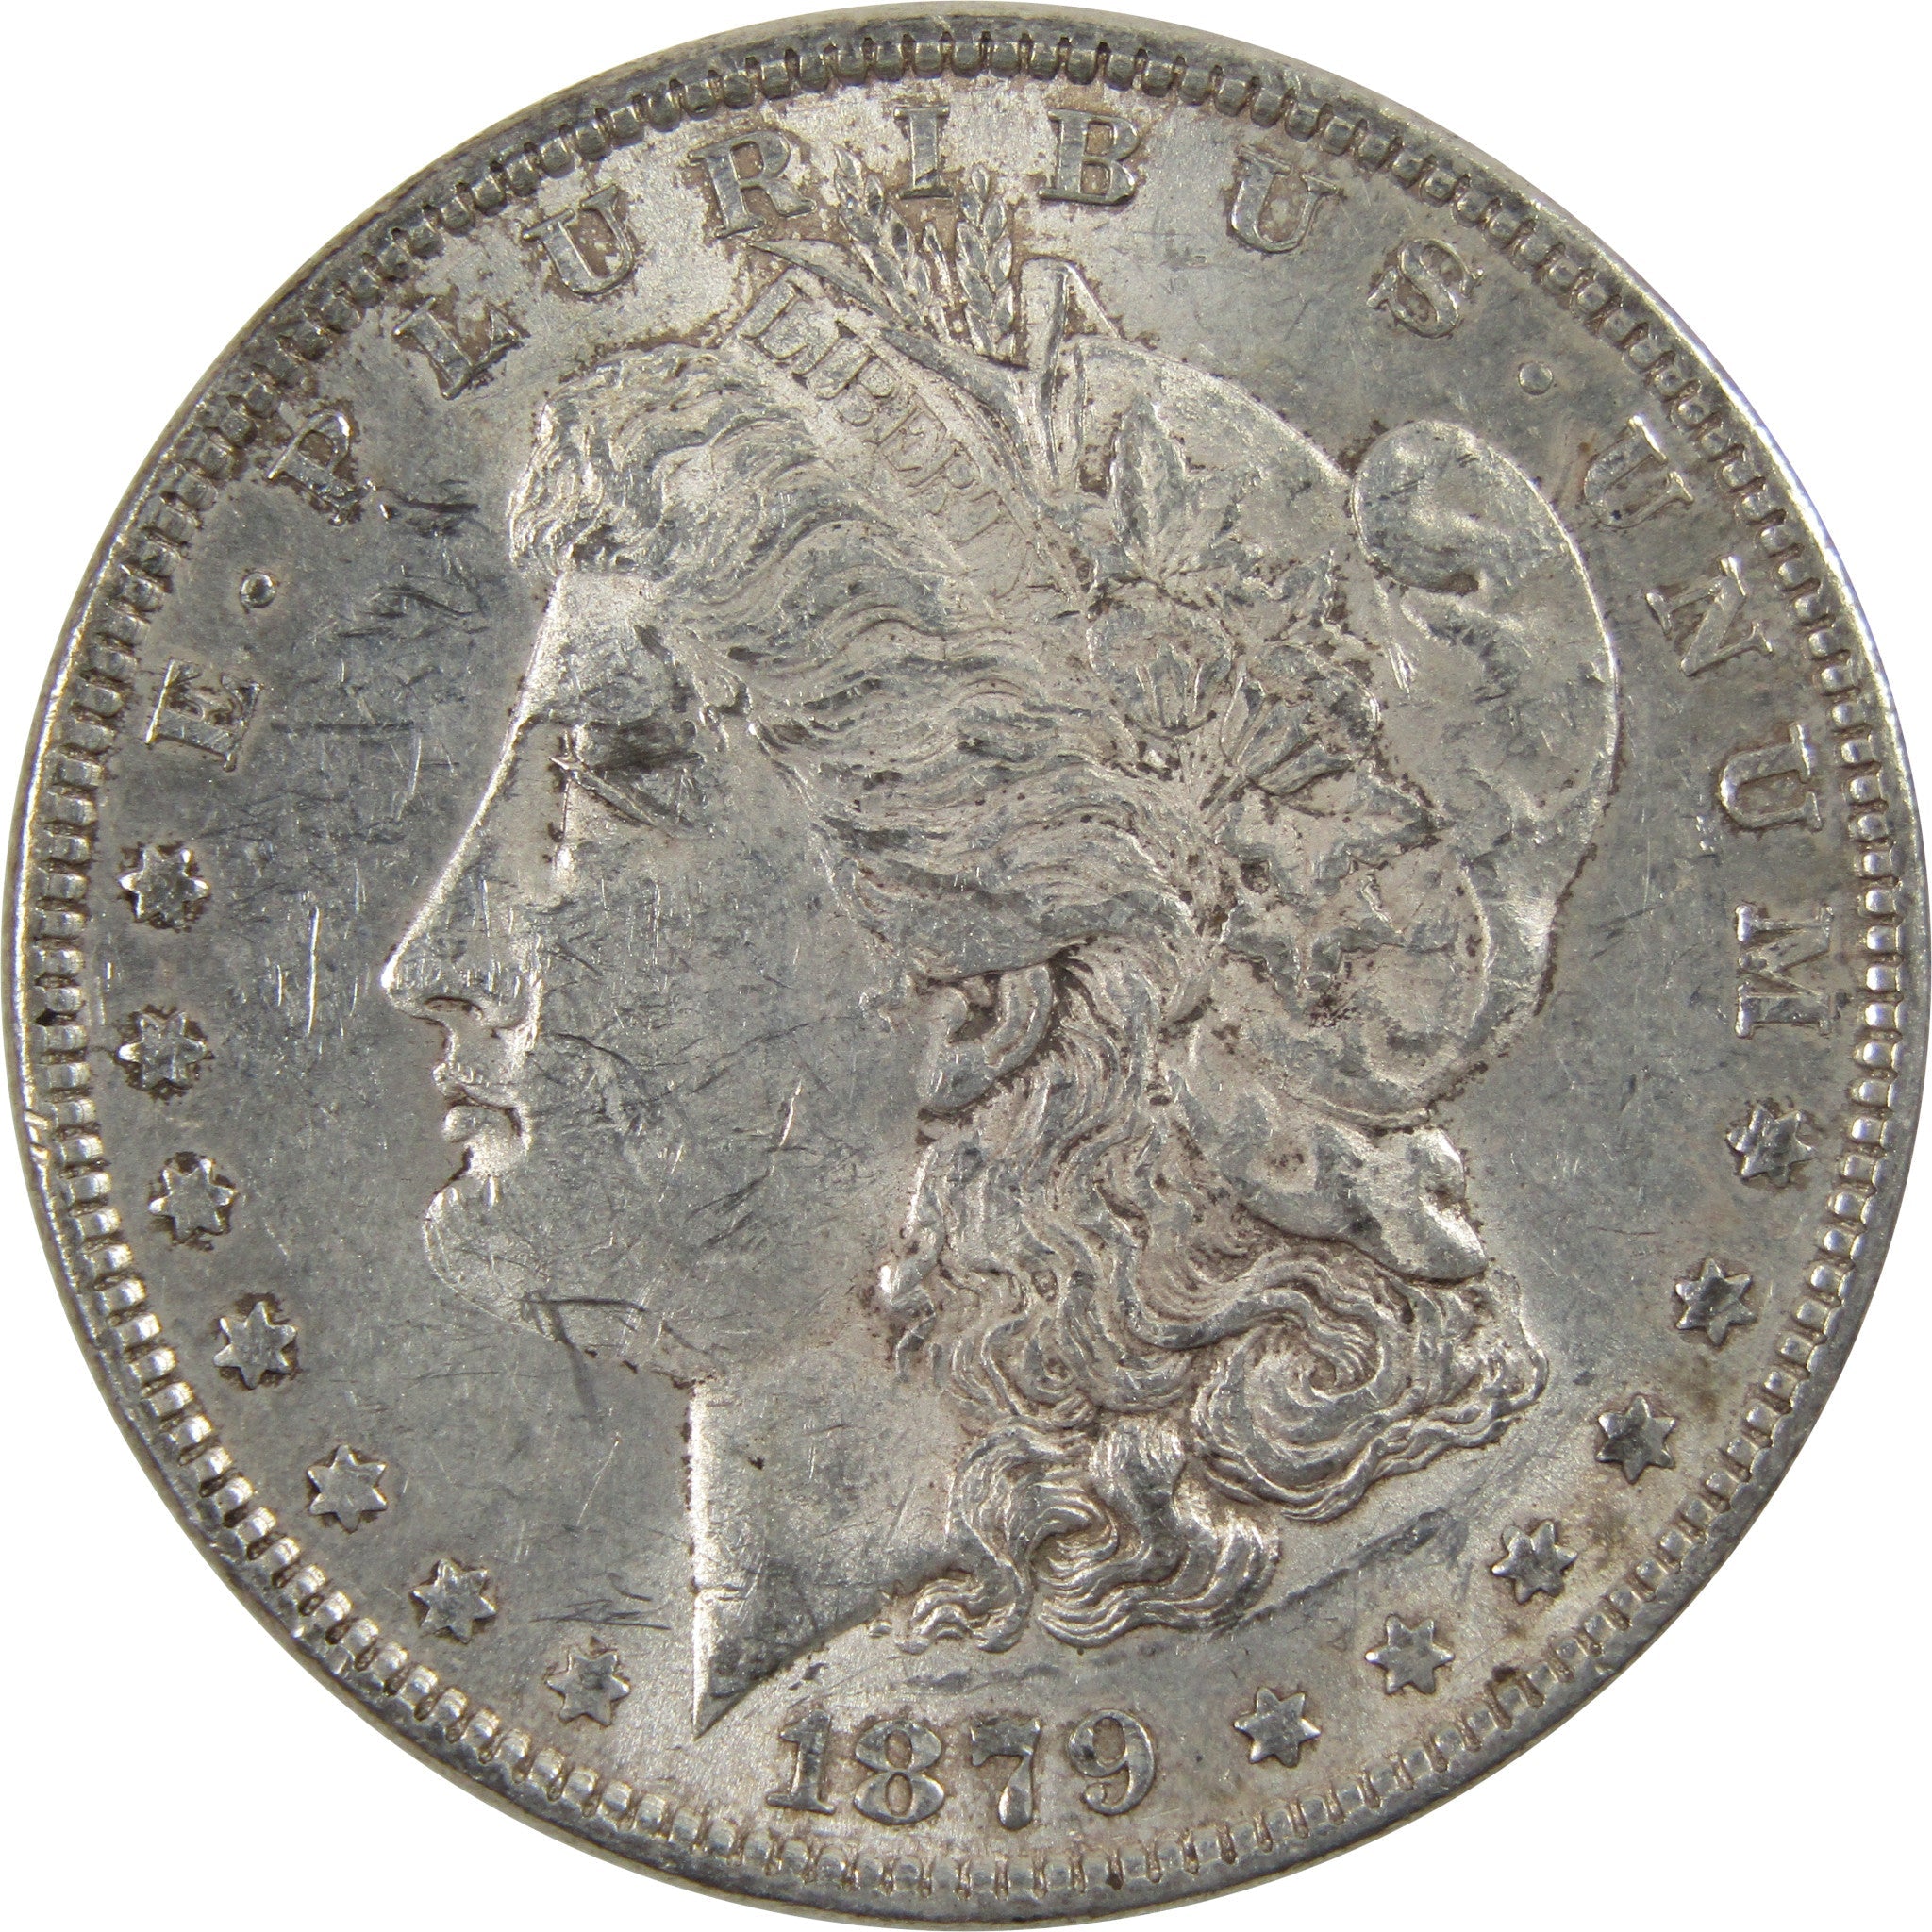 1879 Morgan Dollar AU About Uncirculated 90% Silver $1 Coin SKU:I5454 - Morgan coin - Morgan silver dollar - Morgan silver dollar for sale - Profile Coins &amp; Collectibles